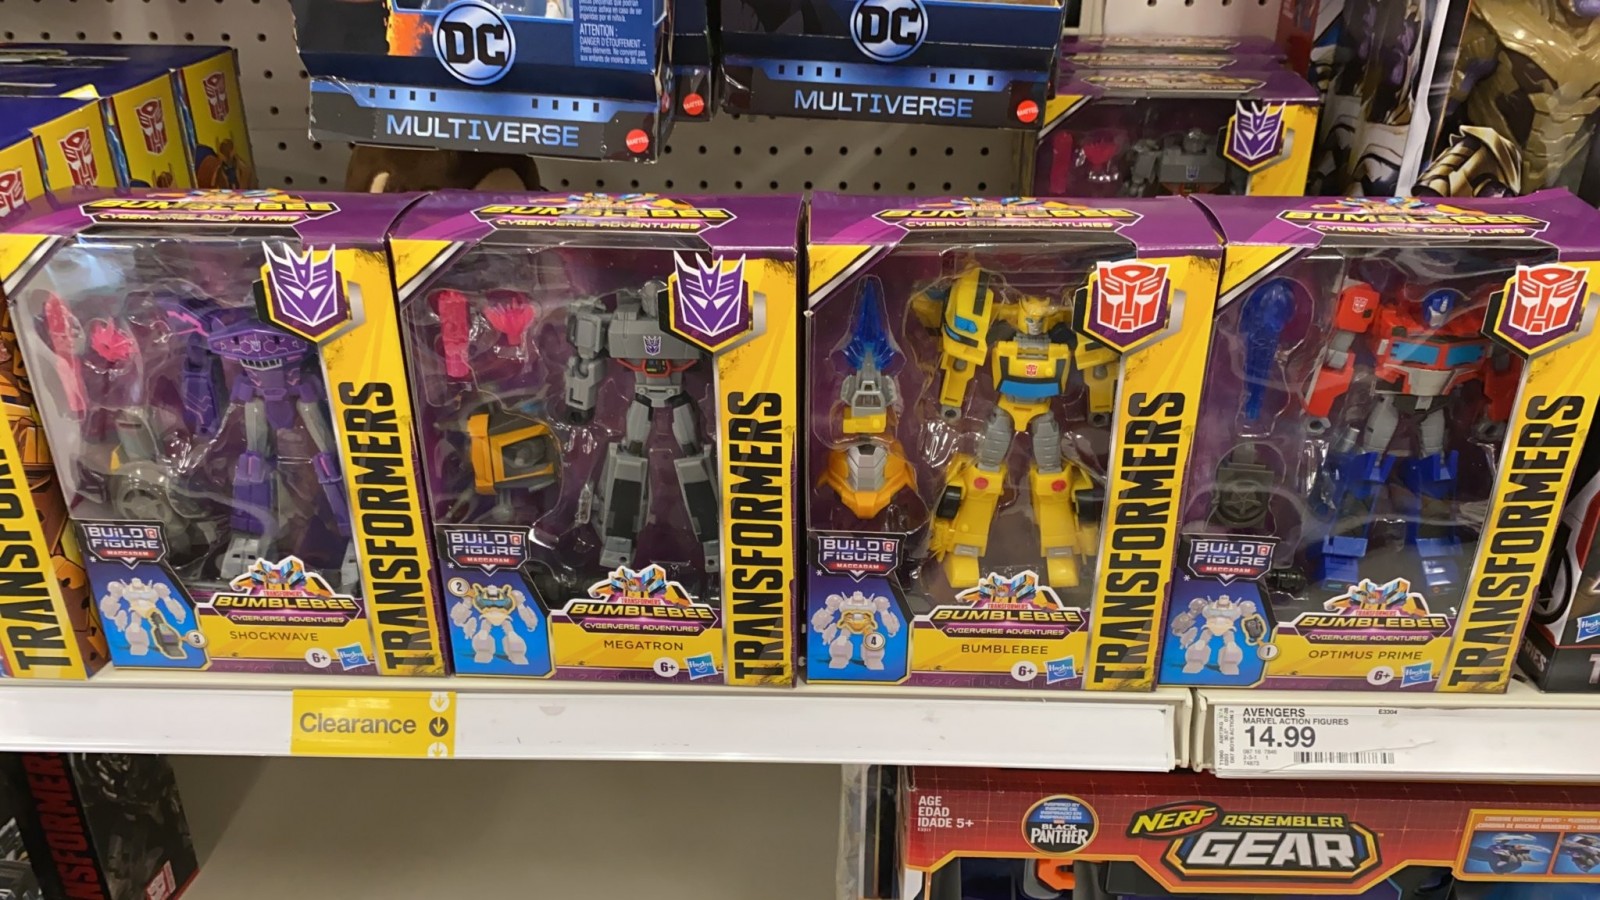 new transformers toys 2020